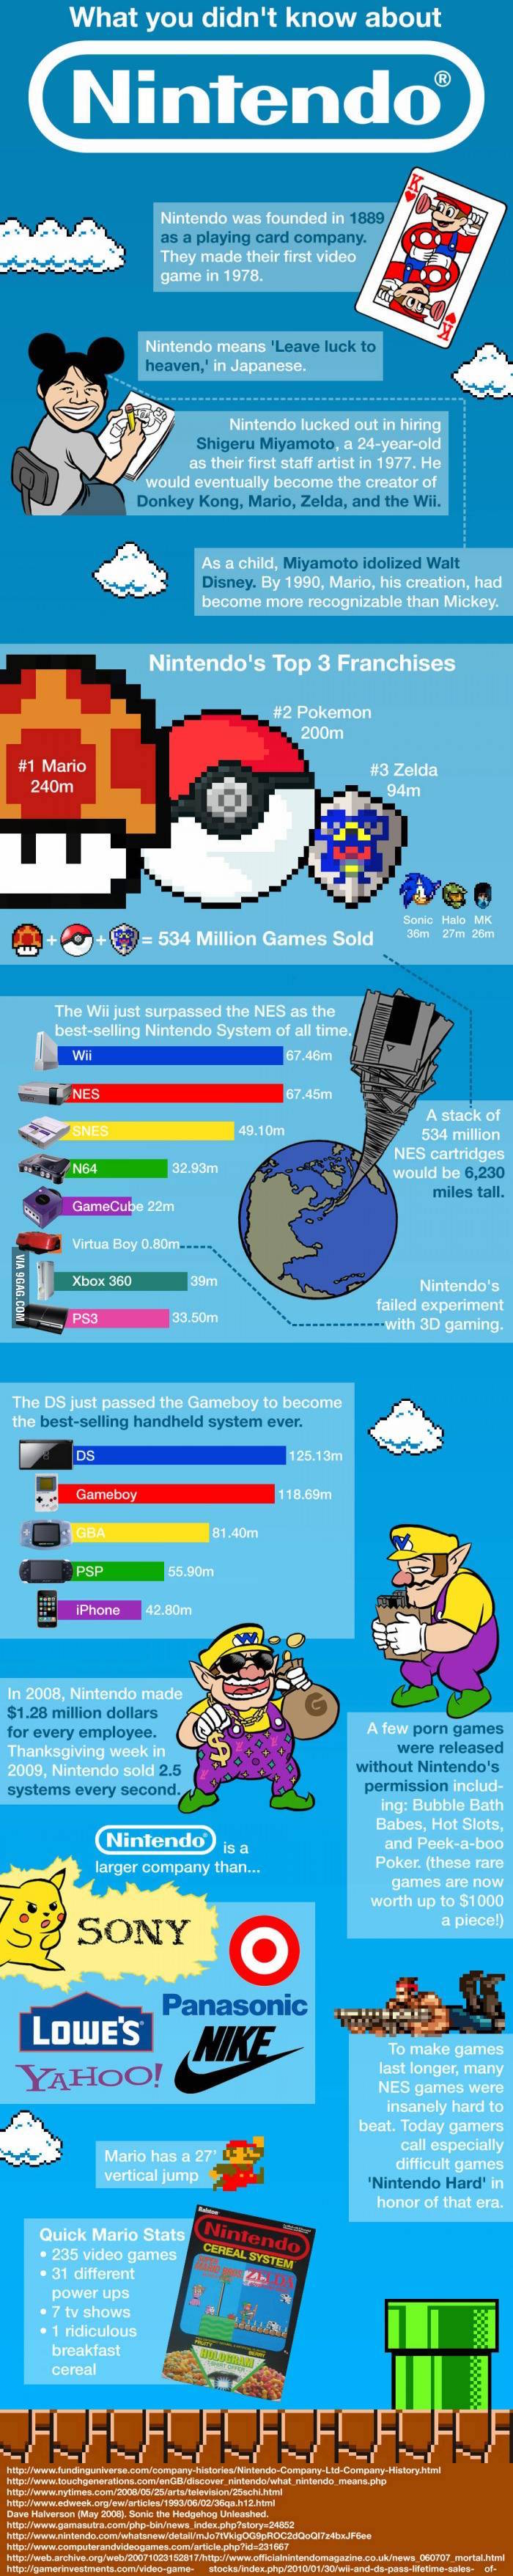 6. Here's a bunch of facts about Nintendo you didn't know